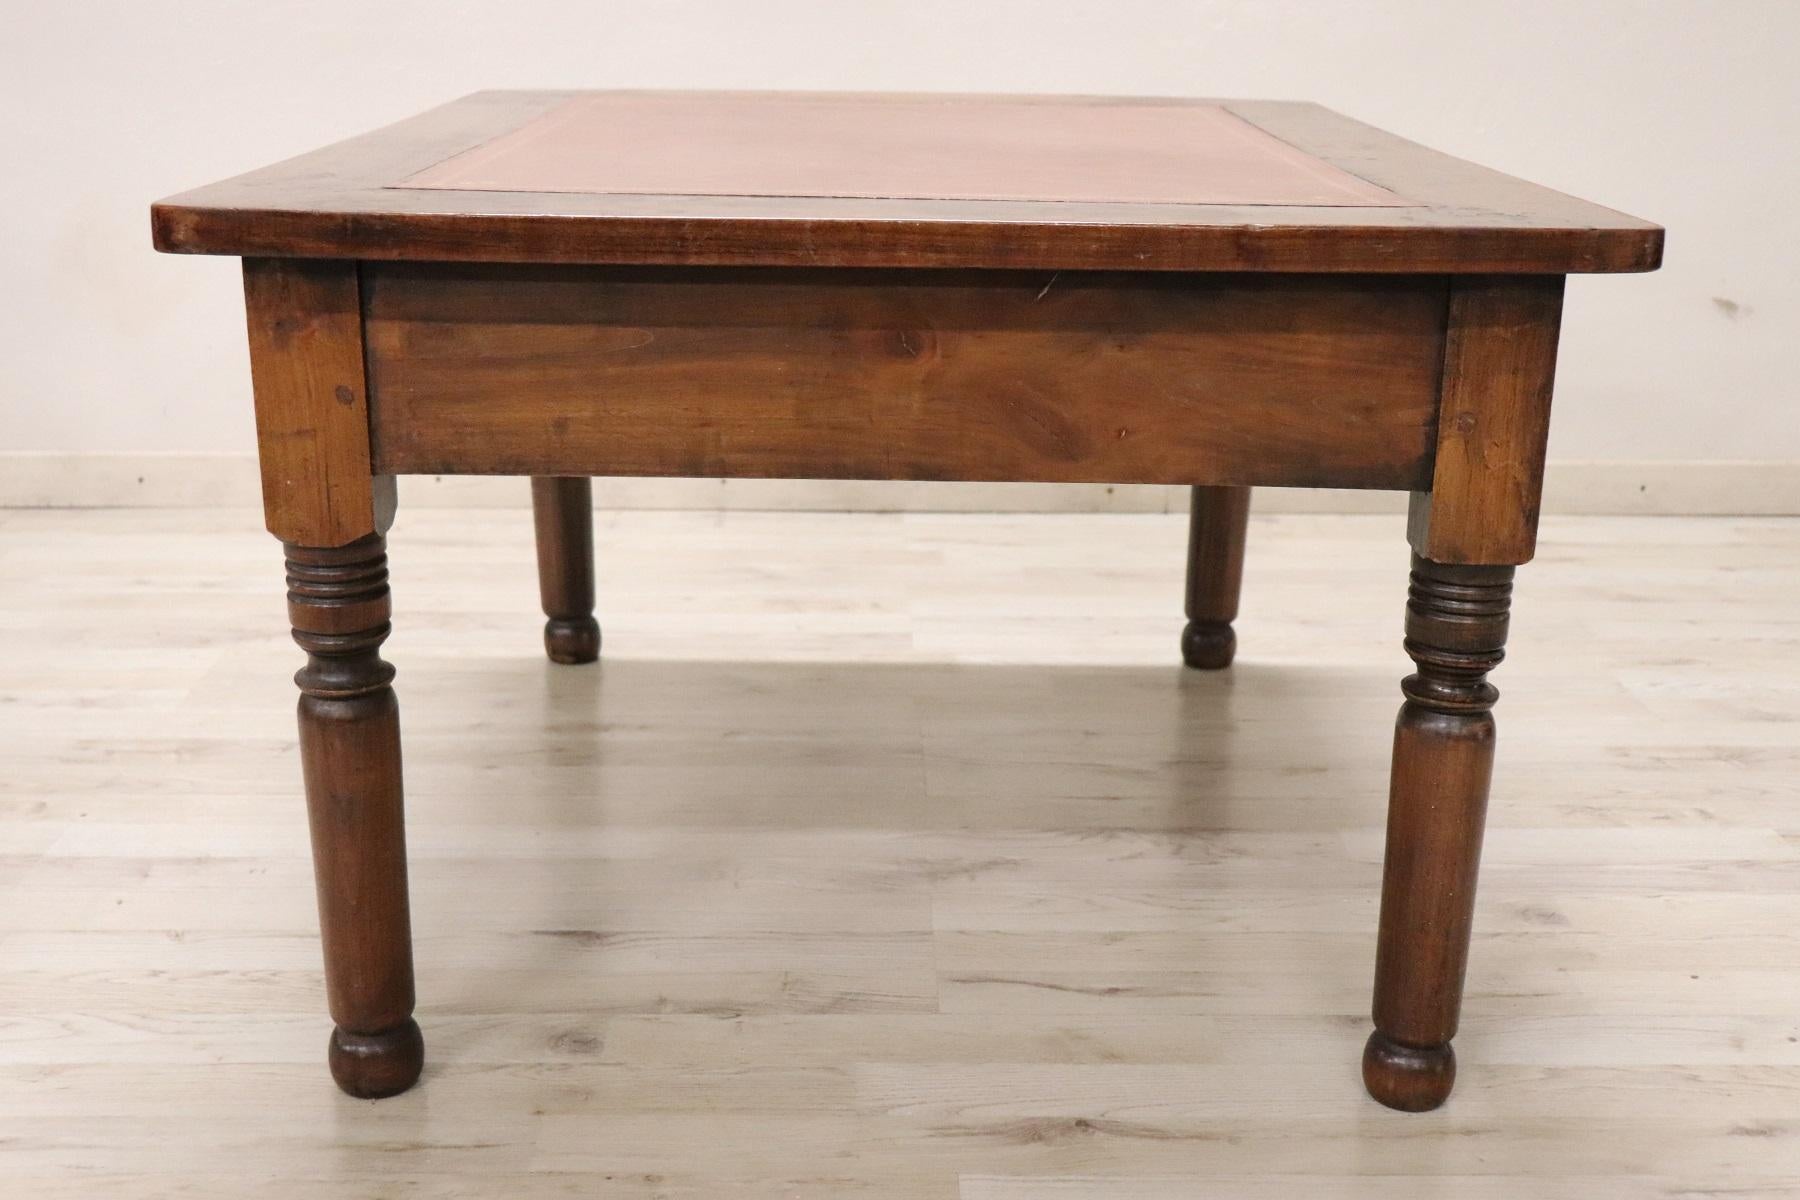 Mid-19th Century 19th Centuy Italian Antique Large Sofa Table or Coffee Table in Cherry Wood